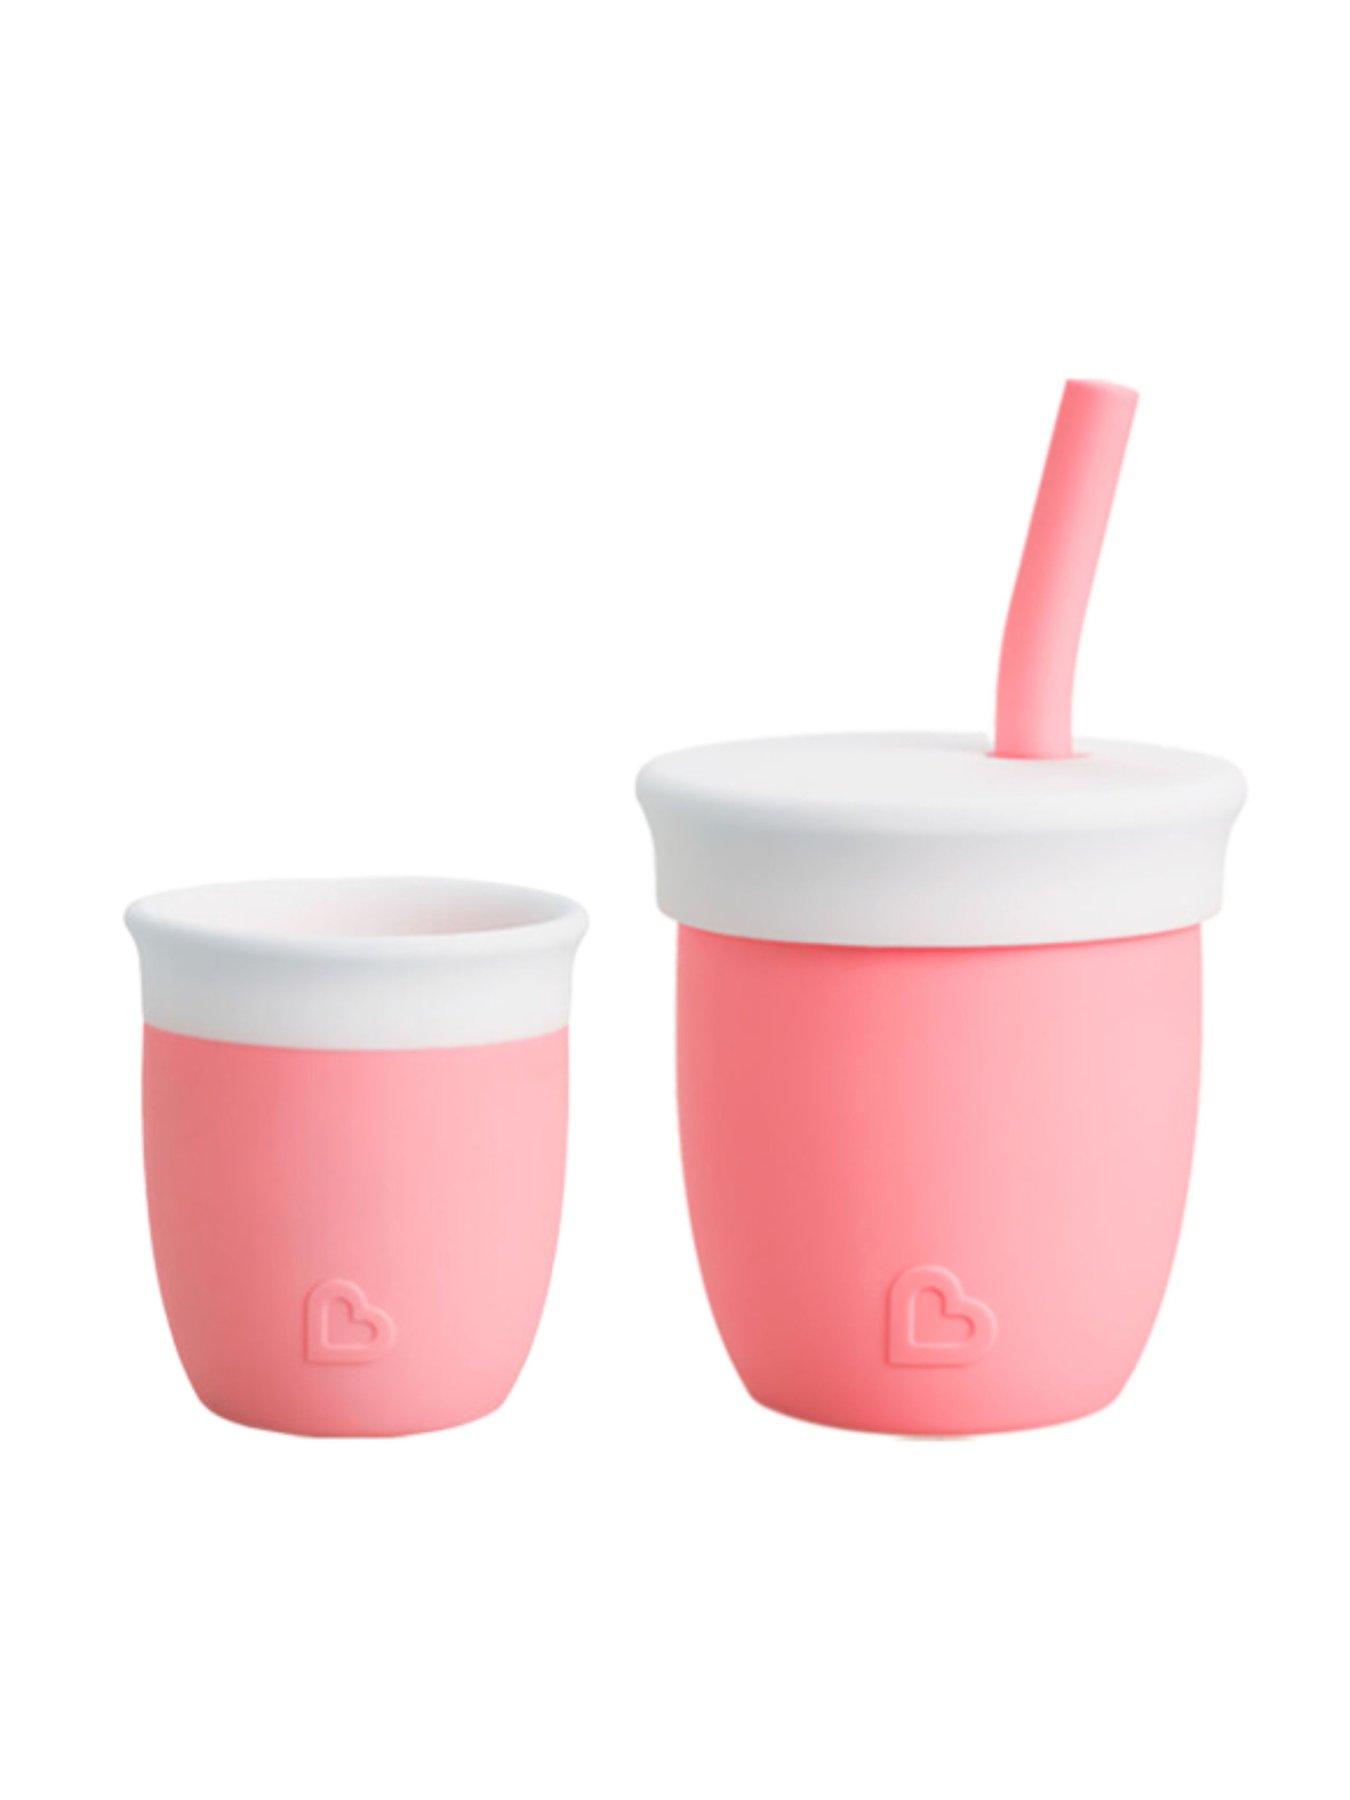 Insert cup 120ml for use in 95mm smoothie cups